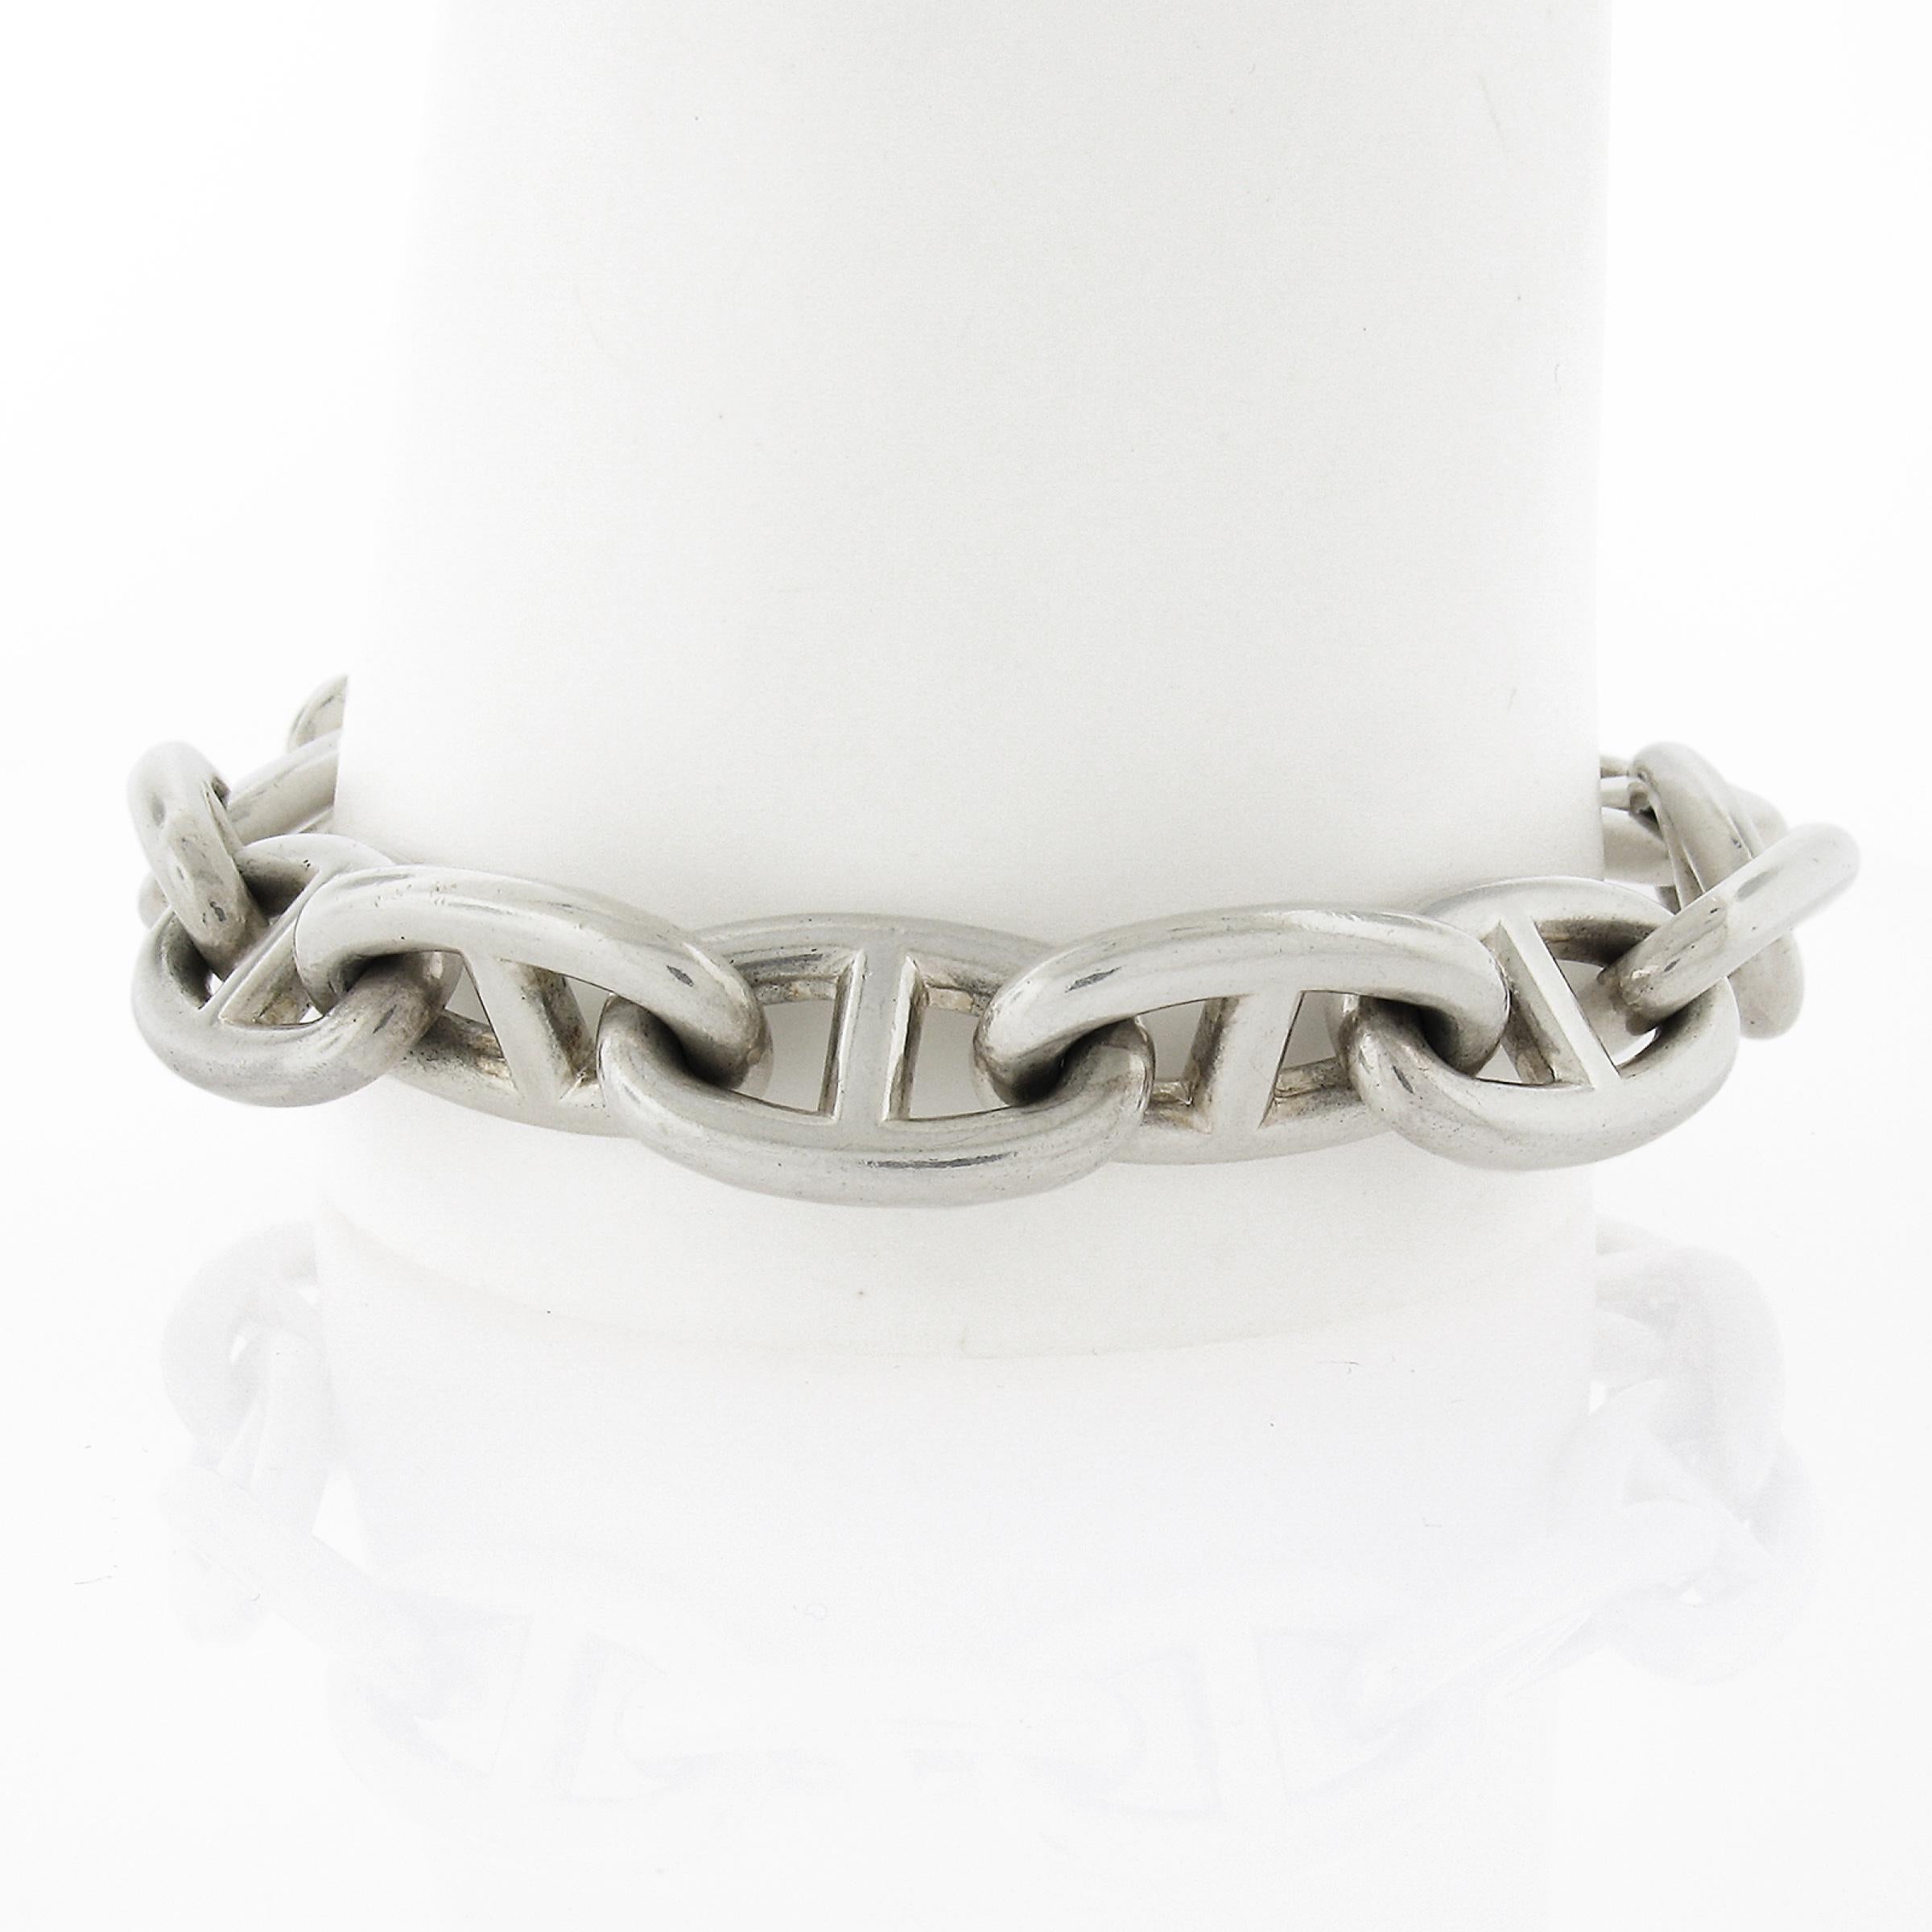 Material: Solid .925 Sterling Silver
Weight: 116.27 Grams
Bracelet Type: Link Bracelet
Length: Will comfortably fit up to a 9.5 inch wrist (Fitted on a wrist)
Clasp: Toggle Clasp
Chain Width: 13.7mm (0.54